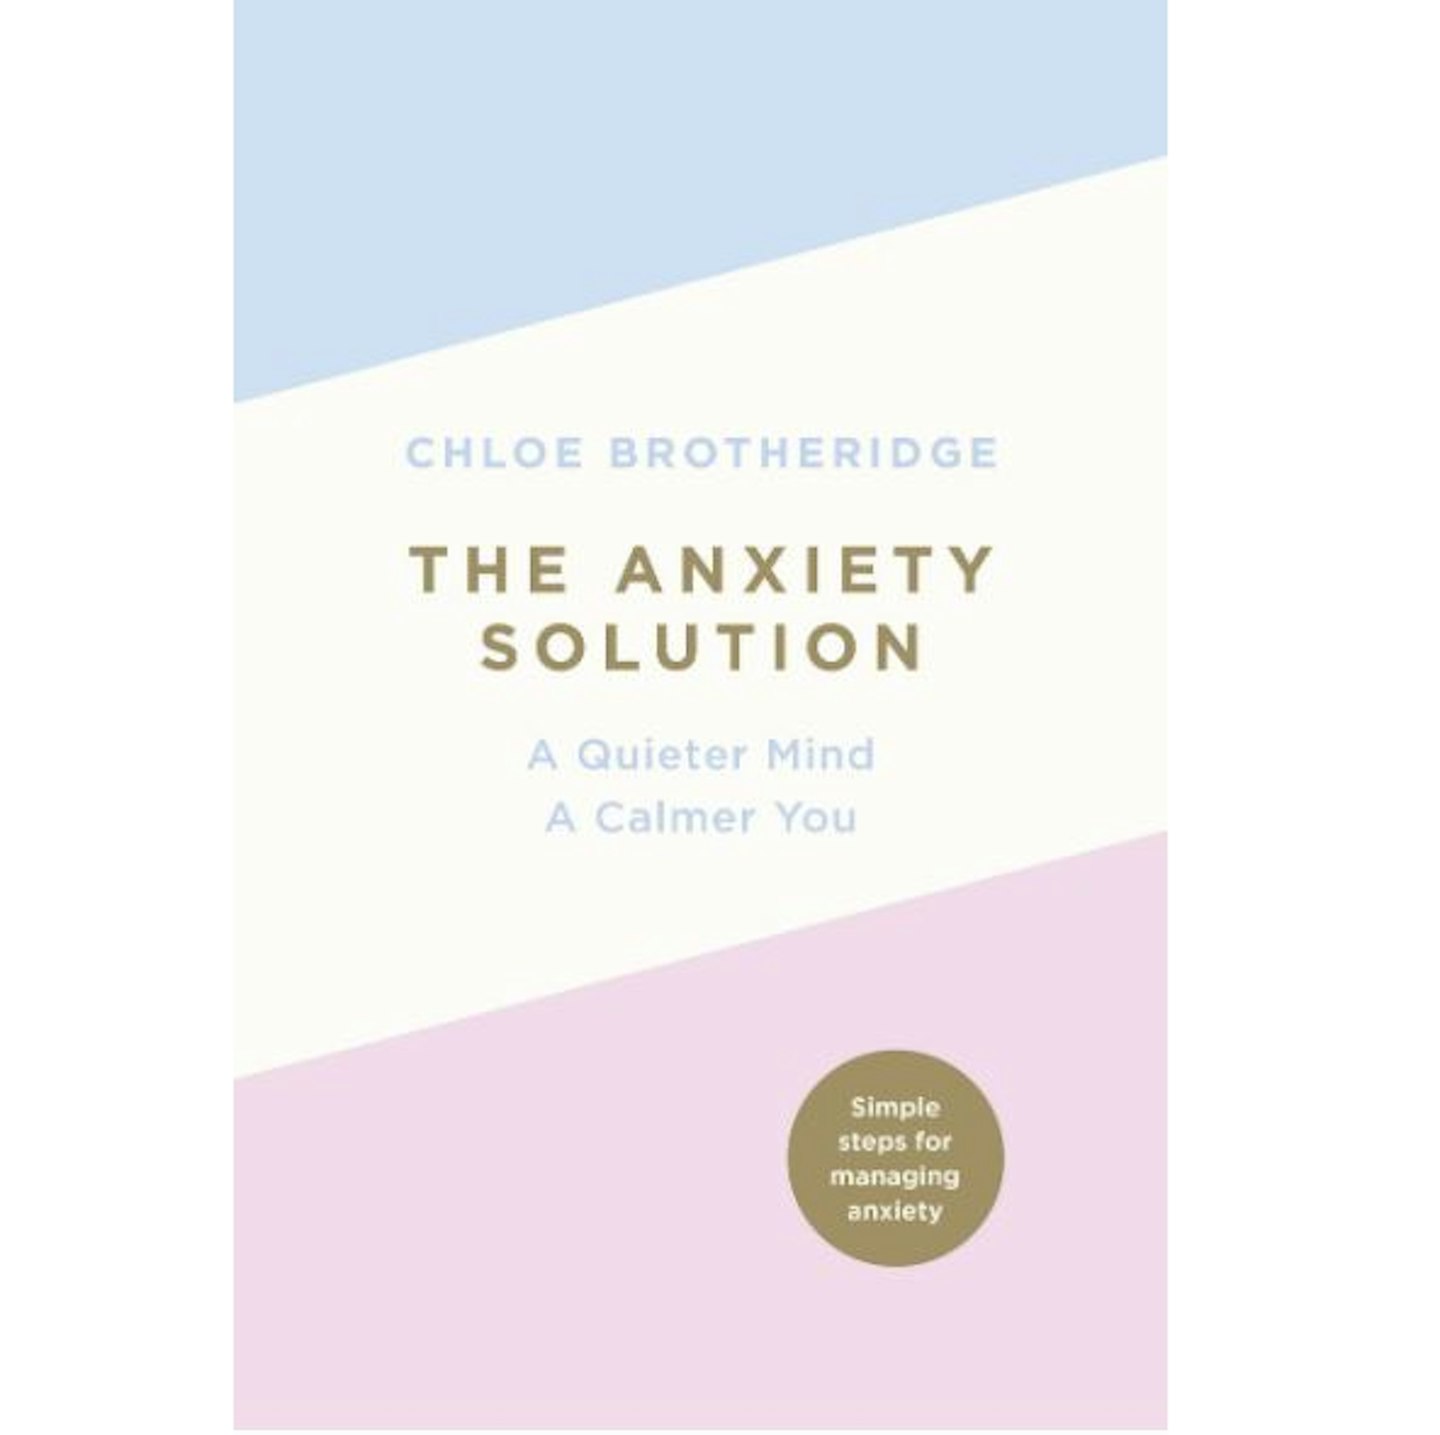 The Anxiety Solution by Chloe Brotheridge